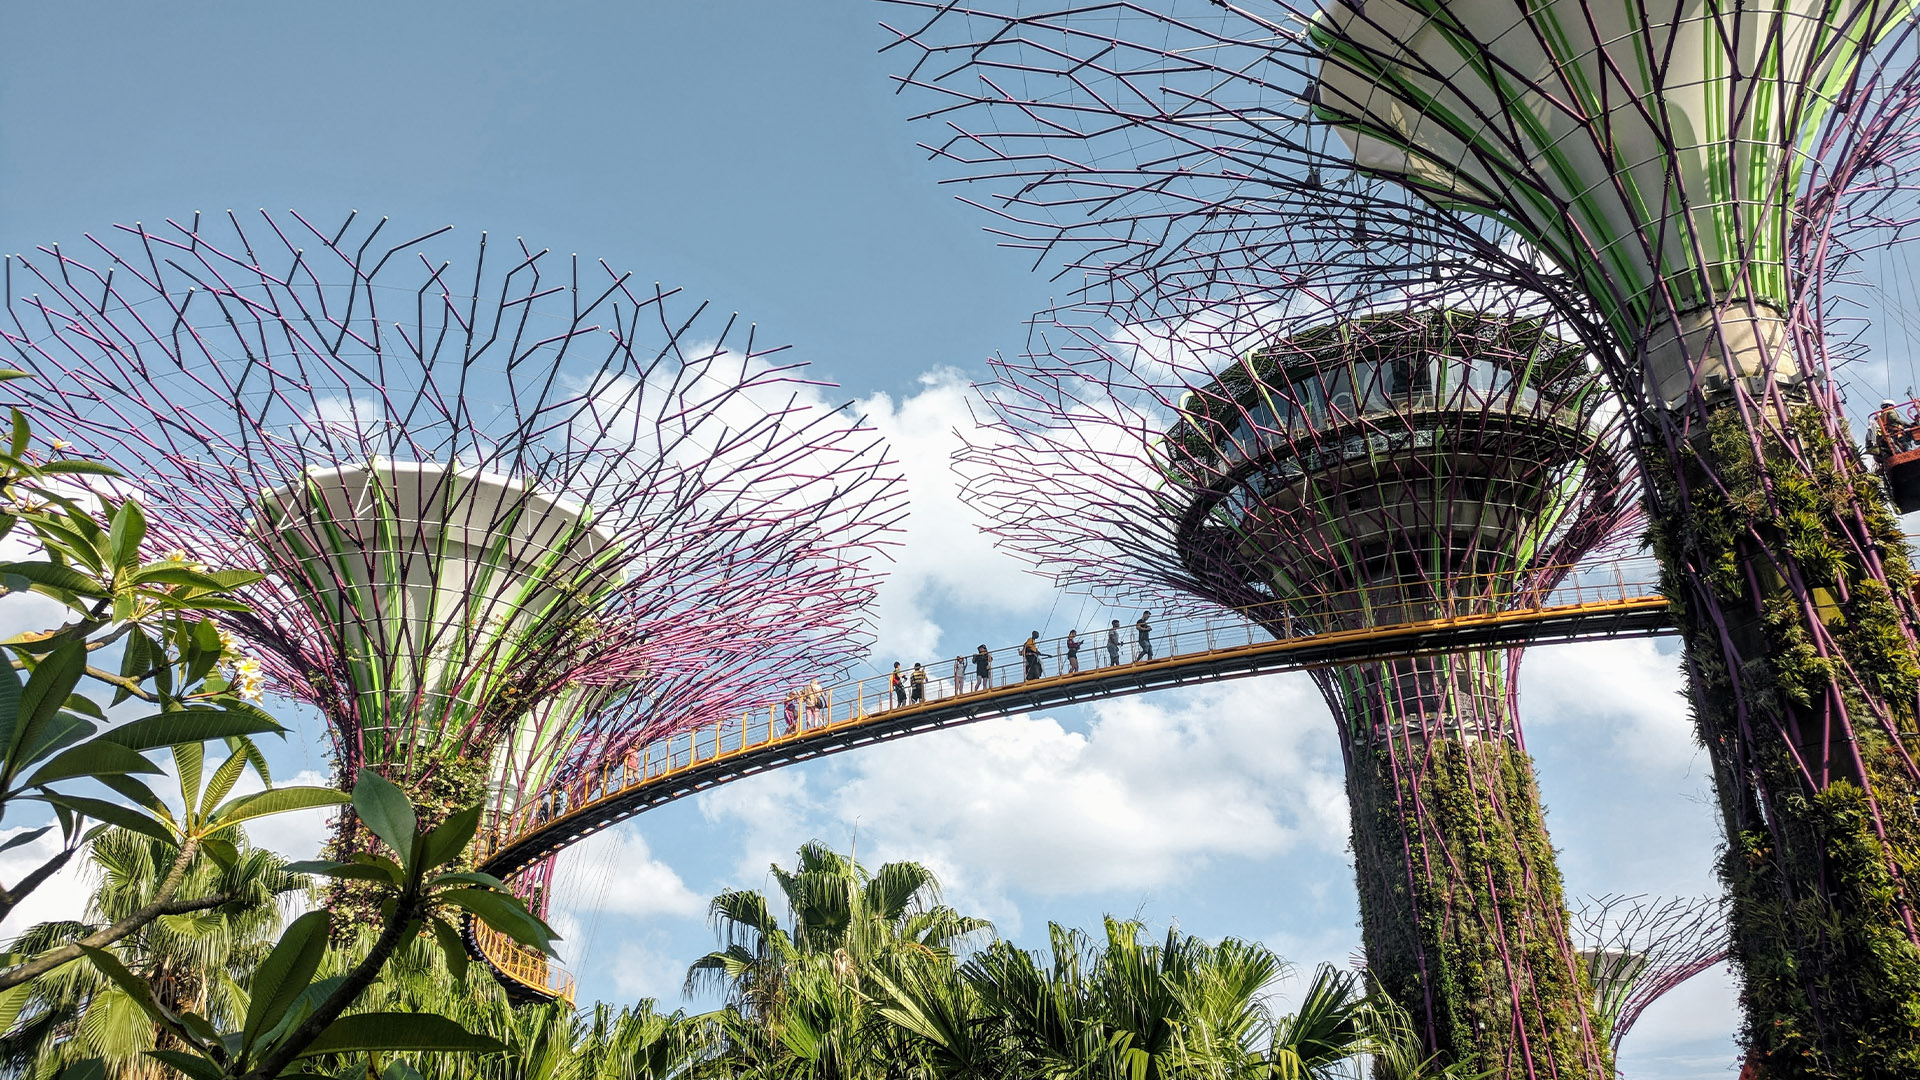 The Gardens by the Bay park area in Singapore.